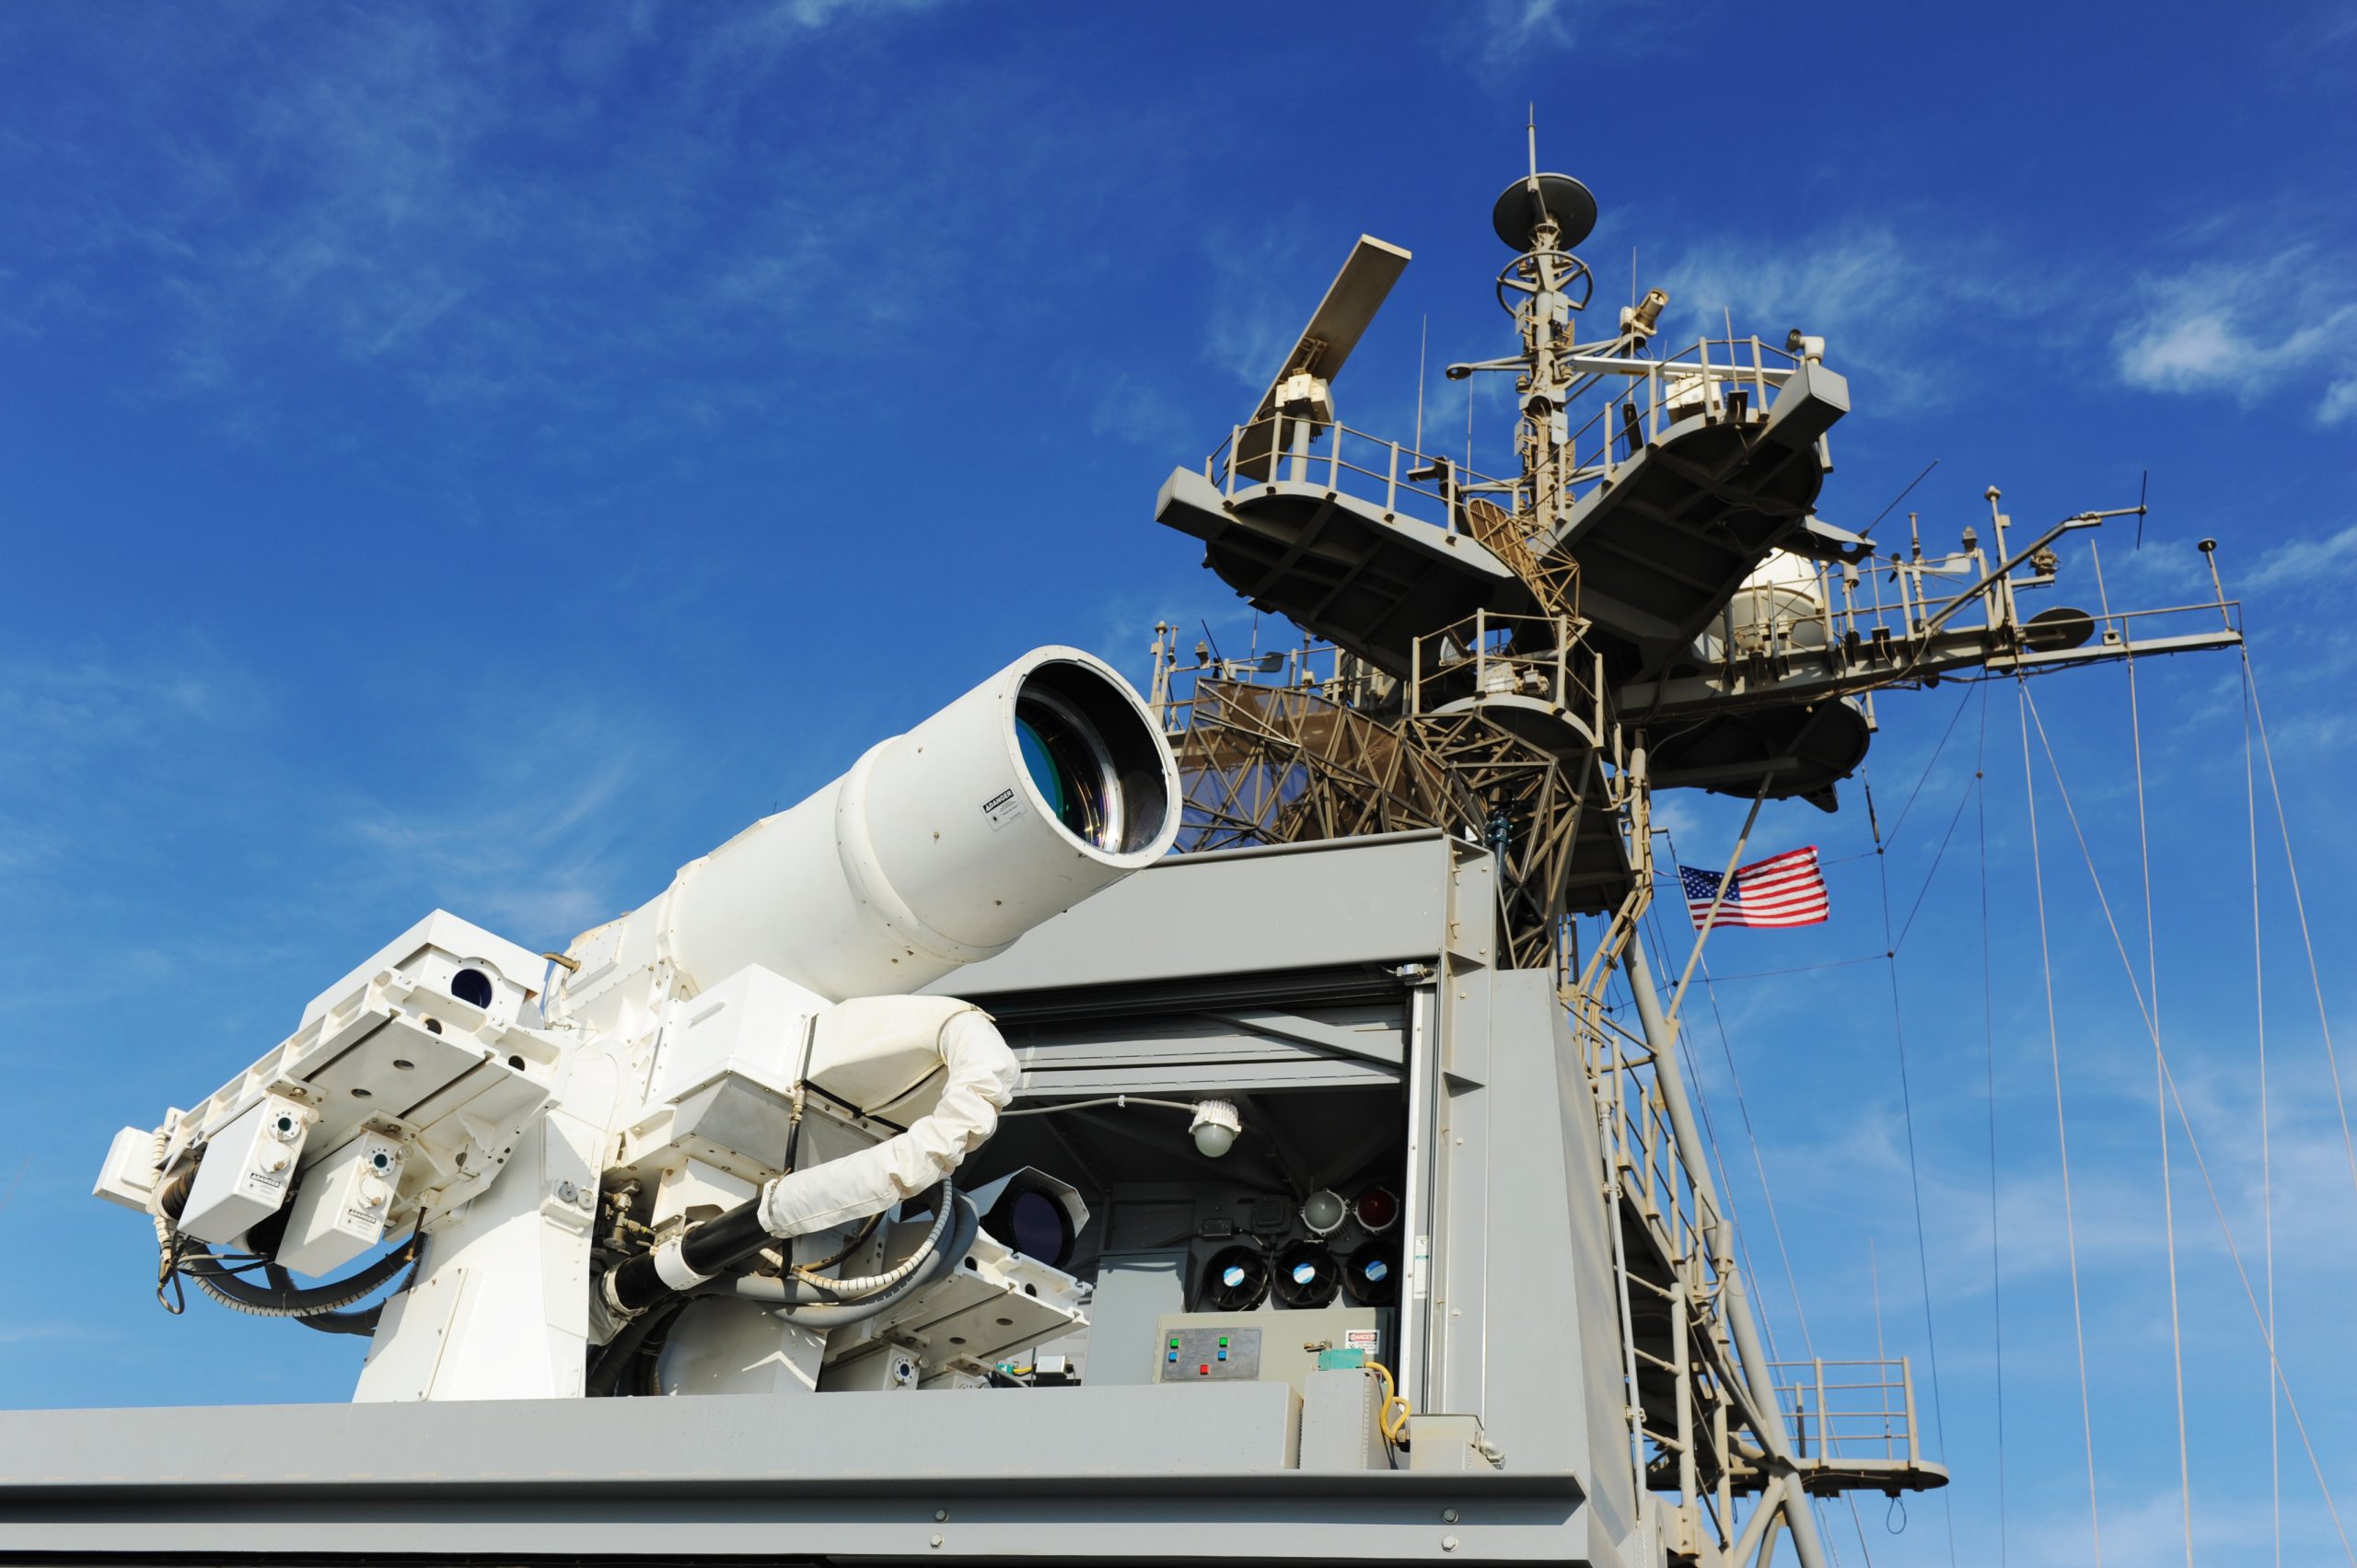 141116-N-PO203-042 ARABIAN GULF (Nov. 16, 2014) The Afloat Forward Staging Base (Interim) USS Ponce (ASB(I) 15) conducts an operational demonstration of the Office of Naval Research (ONR)-sponsored Laser Weapon System (LaWS) while deployed to the Arabian Gulf. (U.S. Navy photo by John F. Williams/Released)